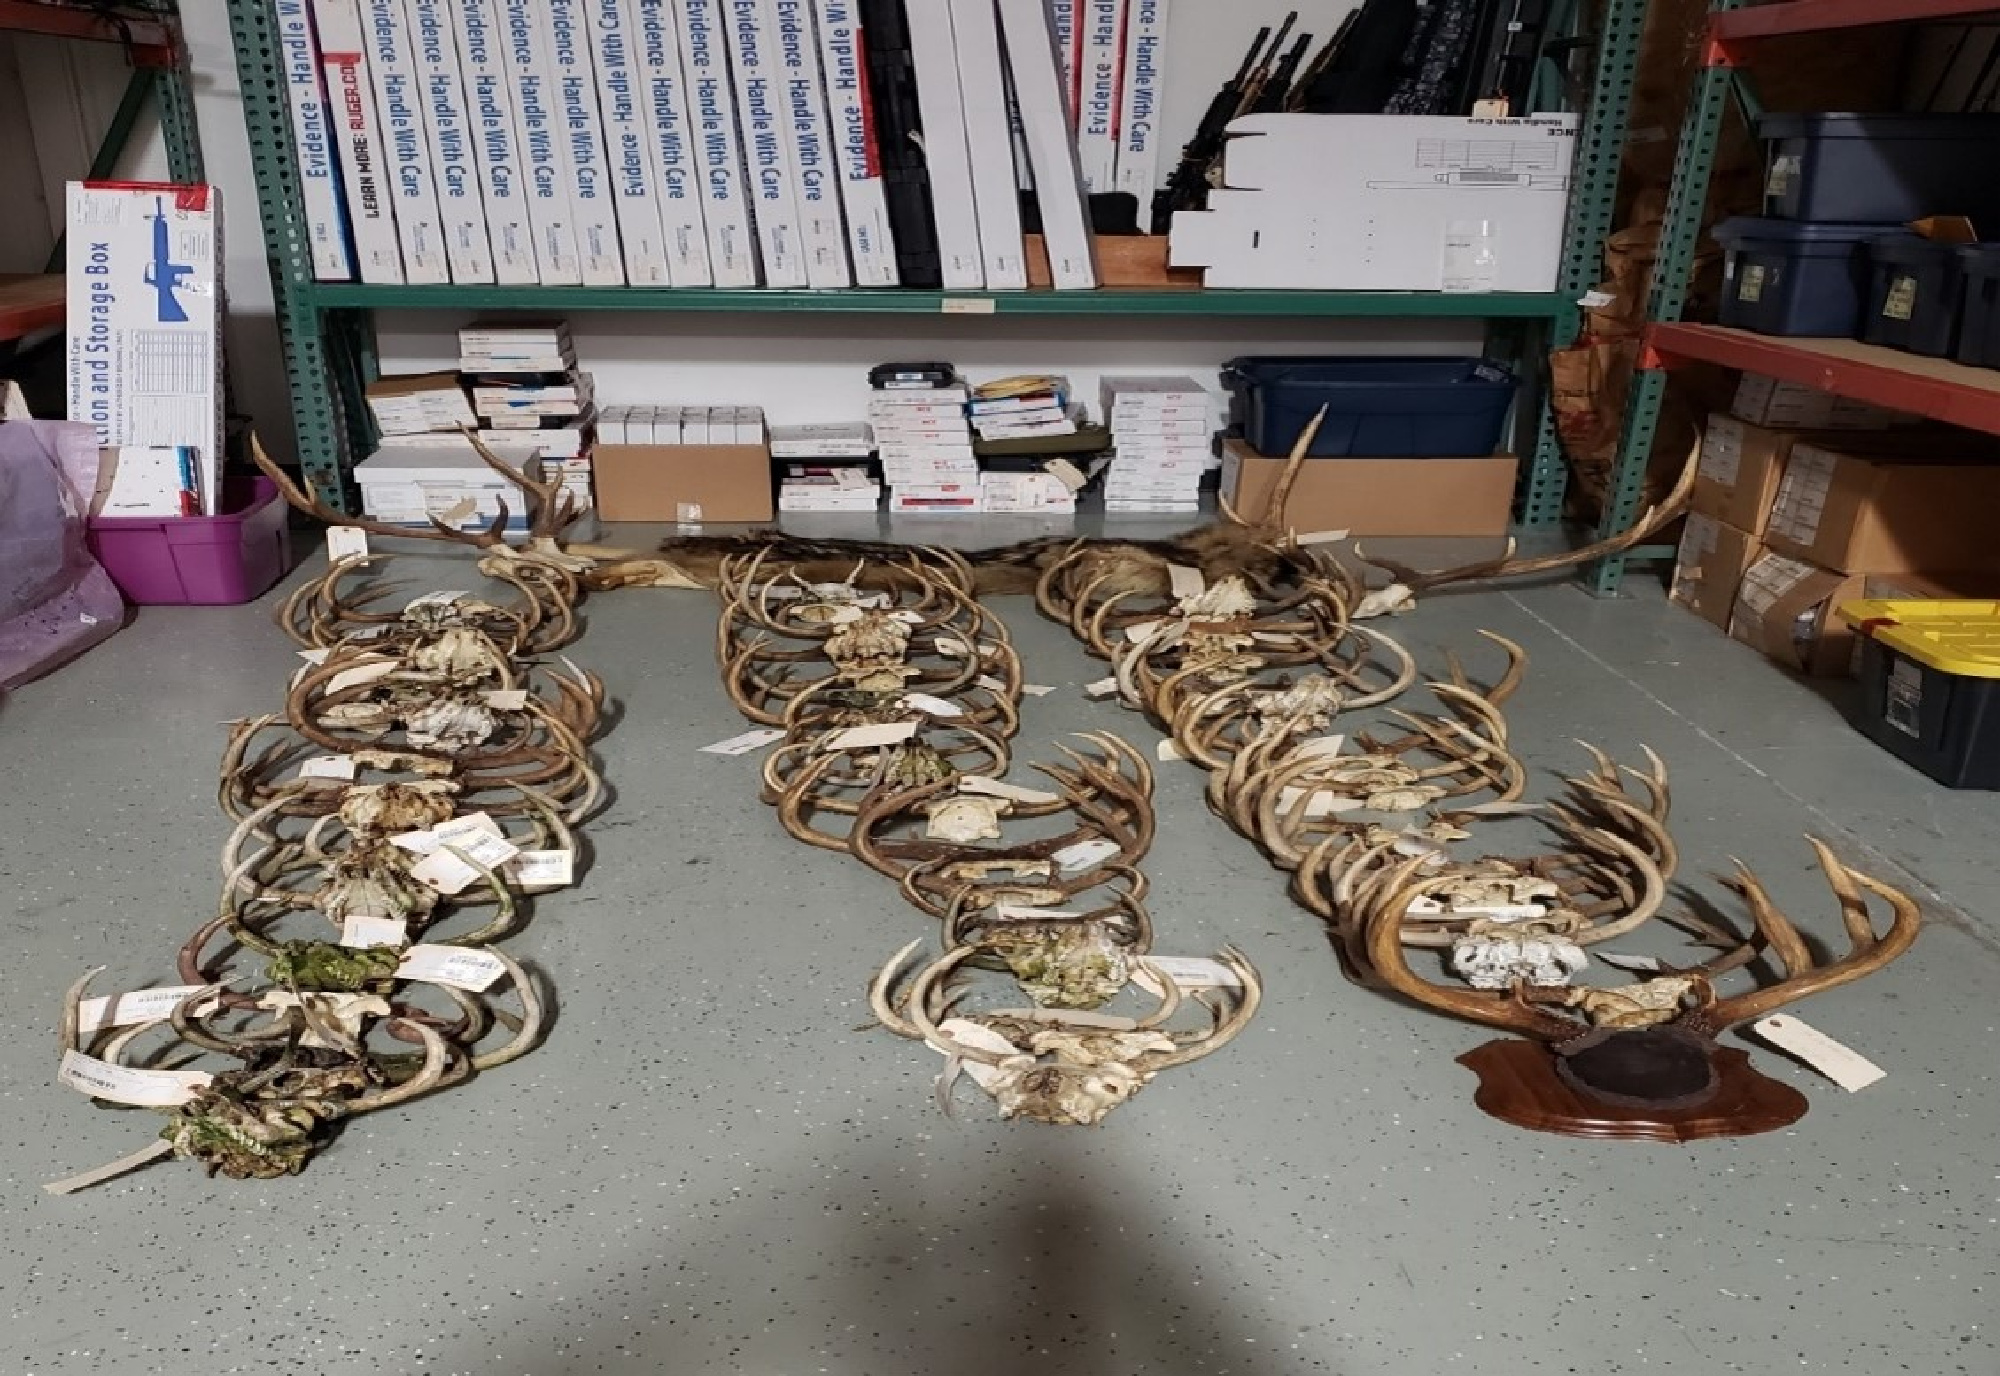 Oregon Felon Caught with Parts from 57 Deer, 2 Elk, and an Owl